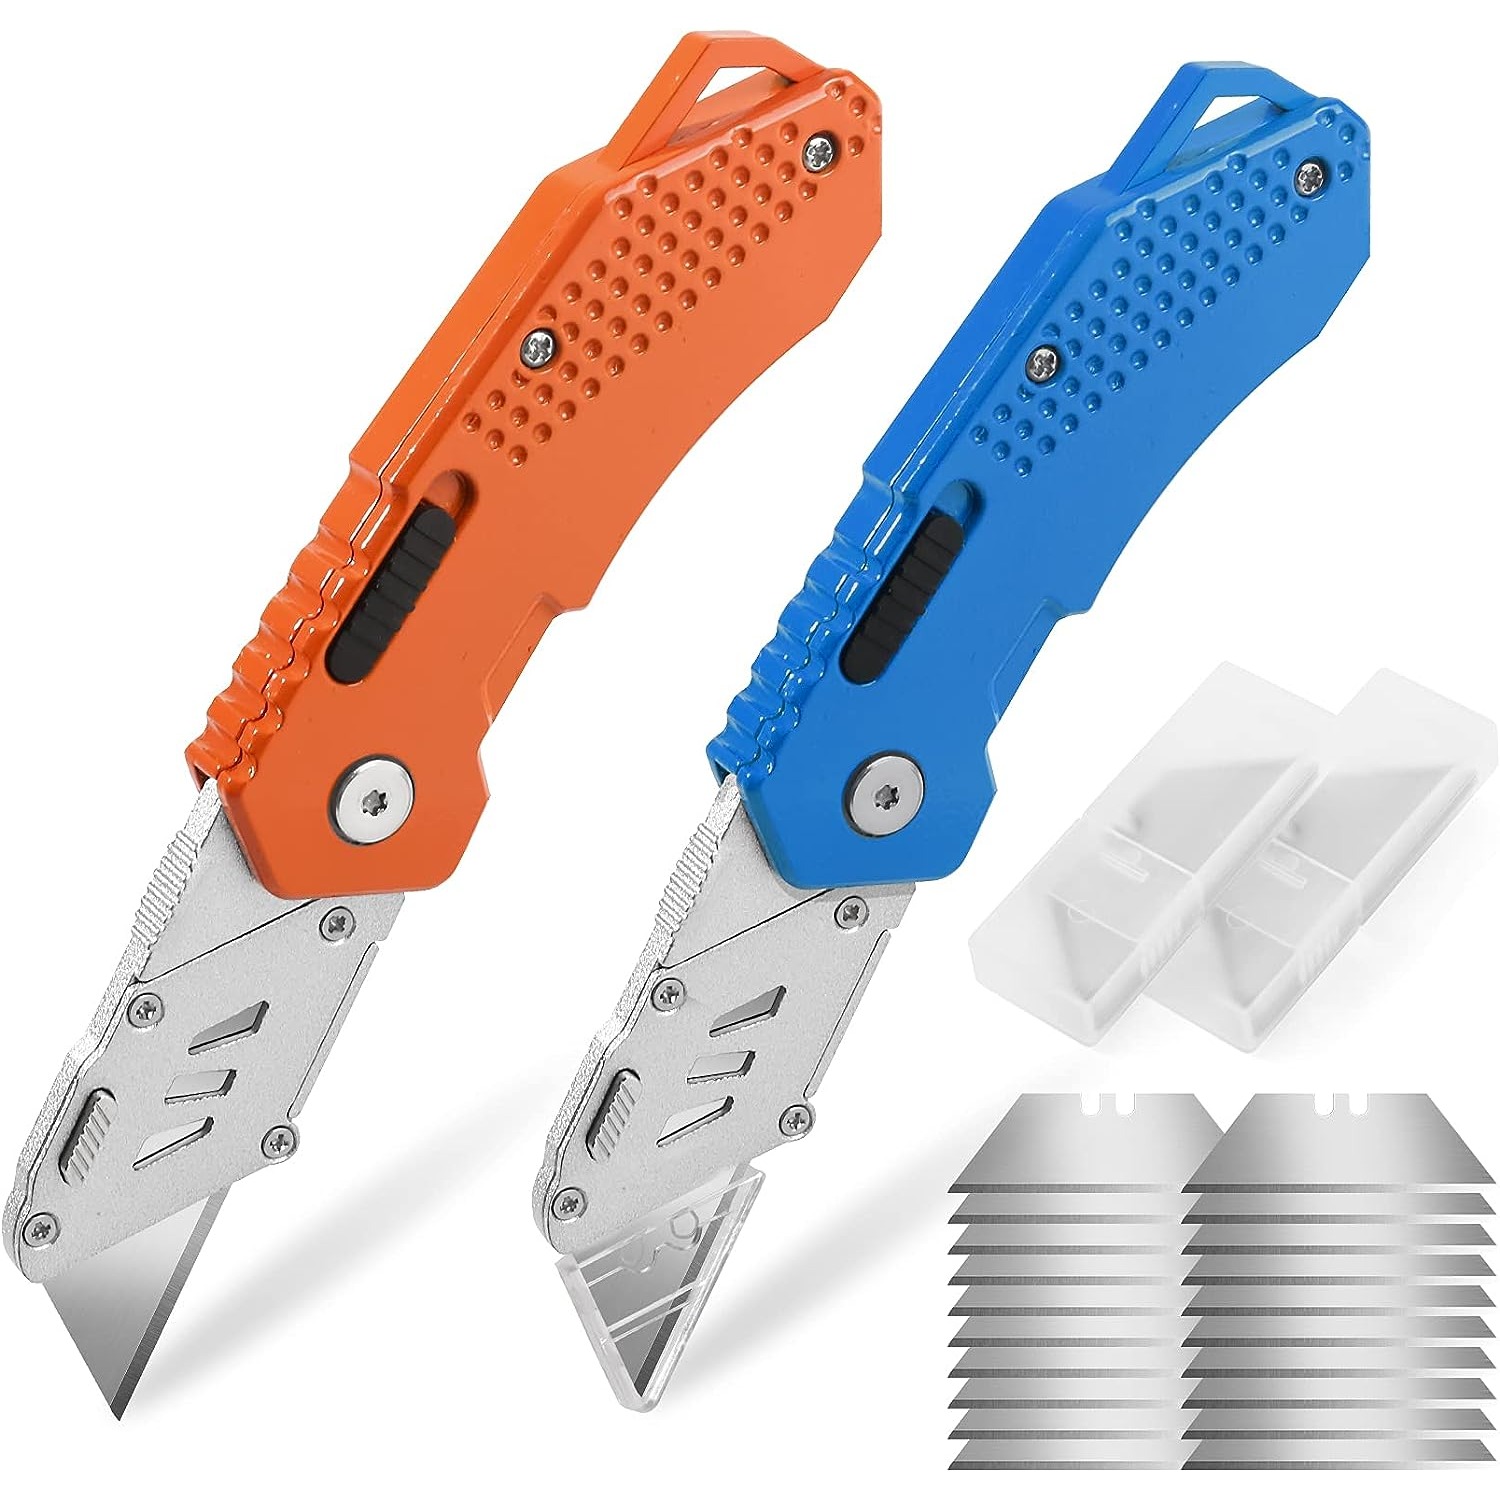 KingTool Box Cutter Utility Knife - Box Cutter Retractable Box Opener With  Total 5 pcs SK5 Blades, Aluminum Shell With Rubber Grip, Razor Blades  Utility Knife For Package 